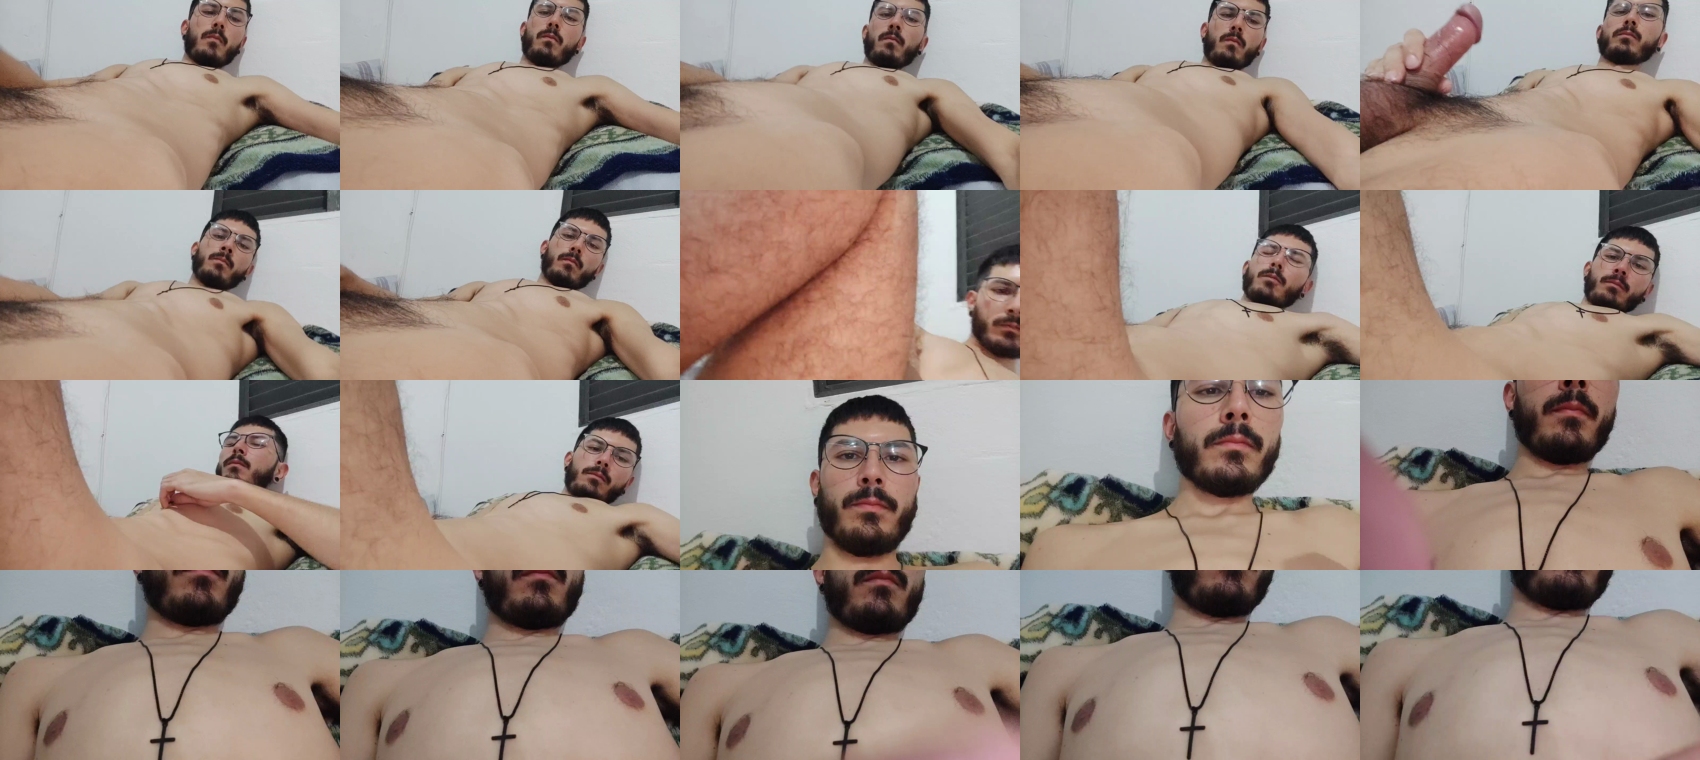 HookFazx  27-08-2022 Recorded Video bicurious